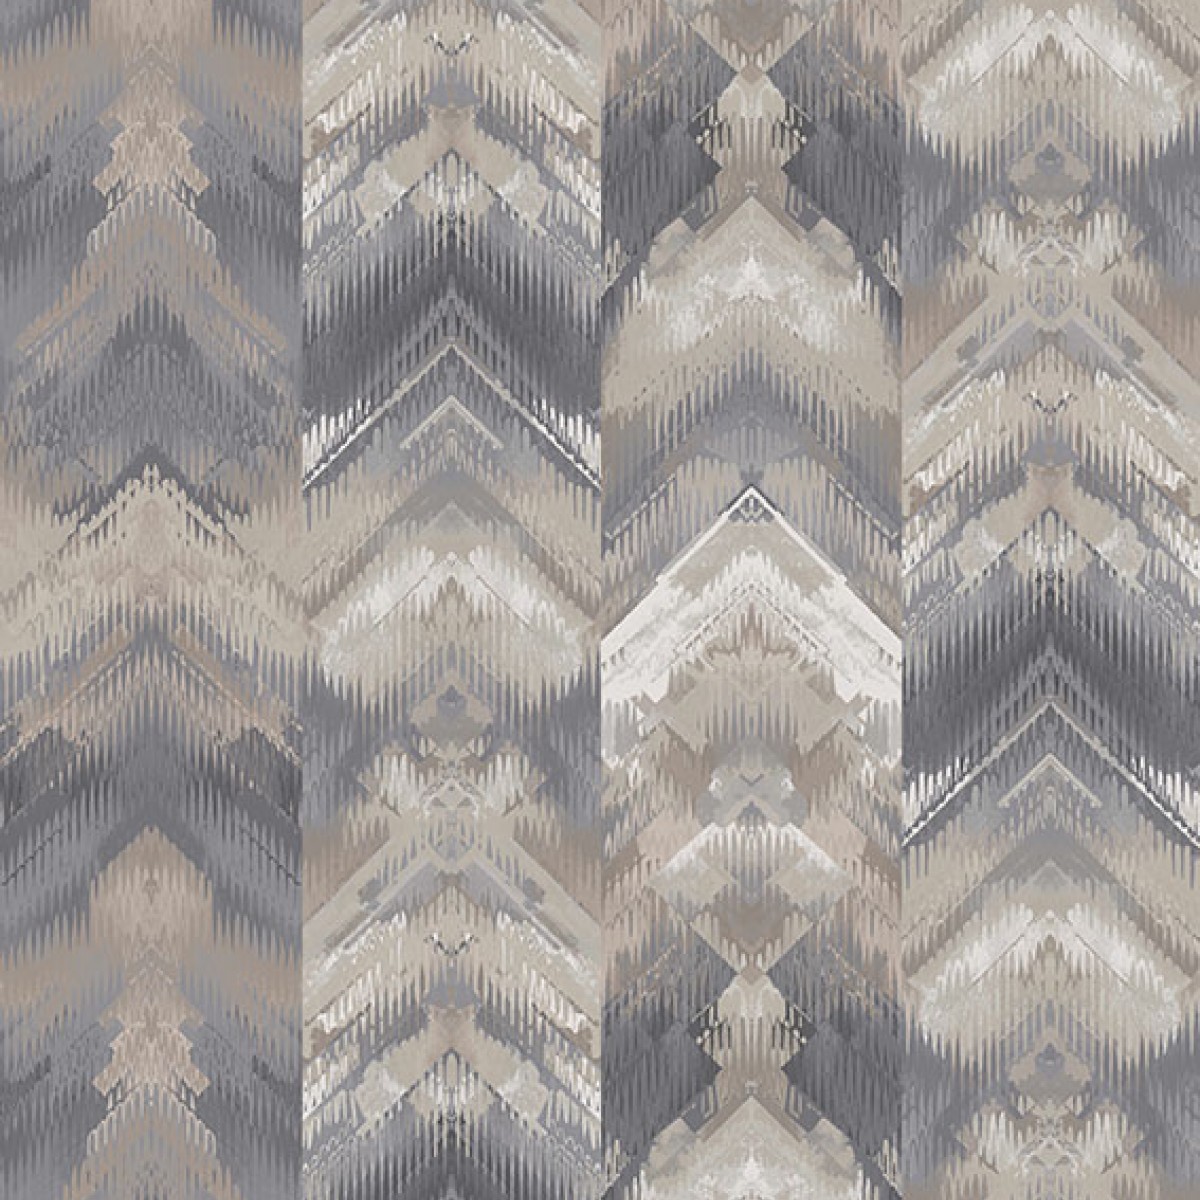 Tapet Reflections, Pewter Silver Luxury Geometric, 1838 Wallcoverings, 6.5mp / rola, Tapet living 